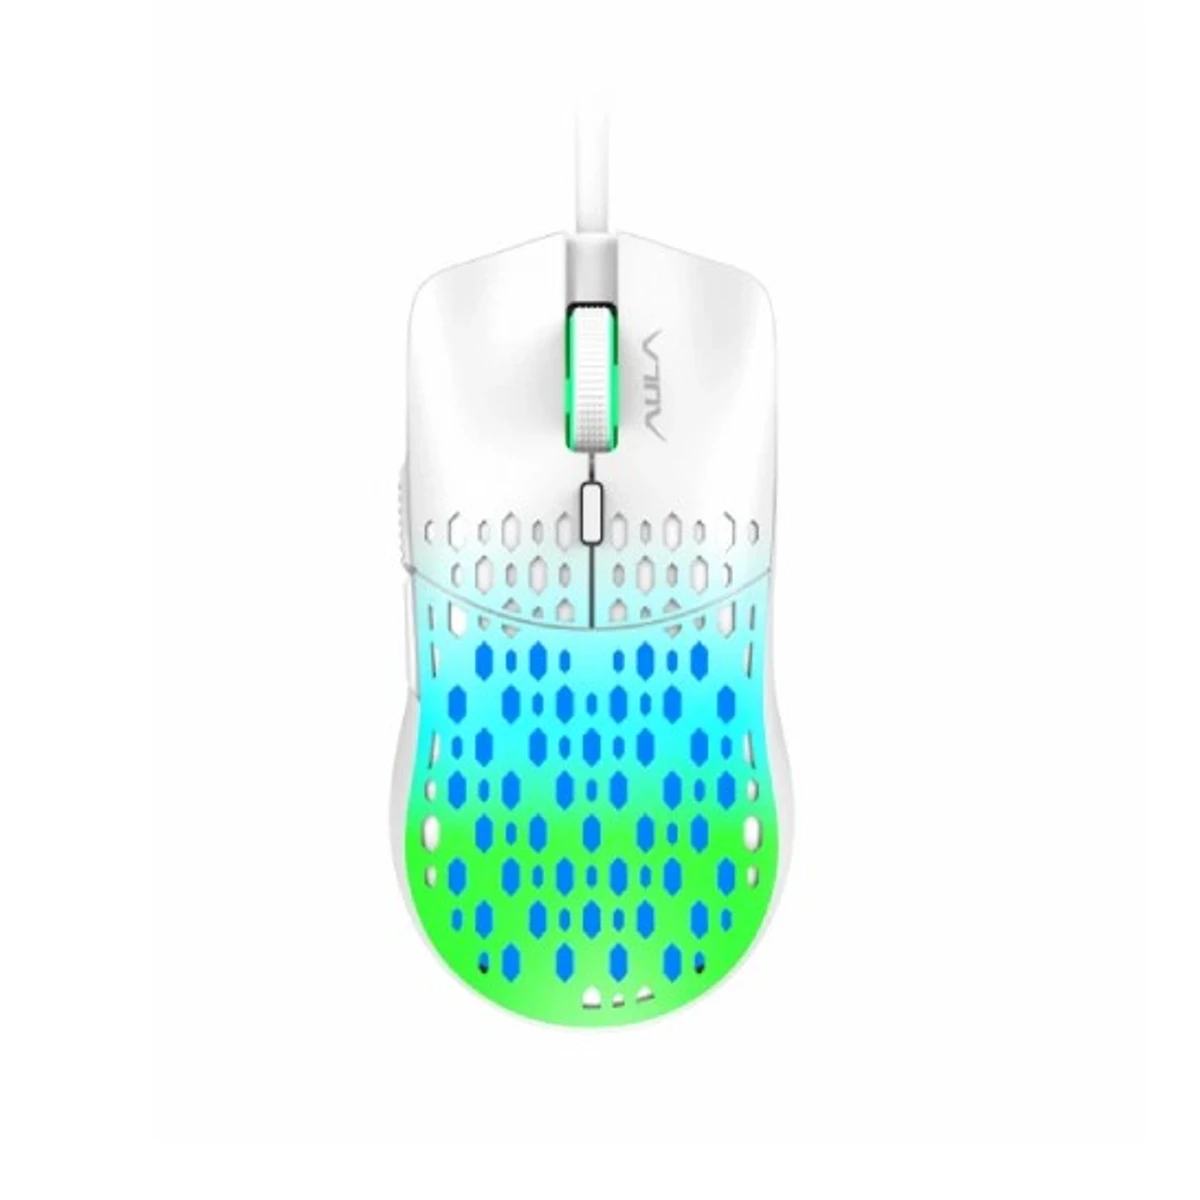 AULA S11 Pro Wired Gaming Mouse